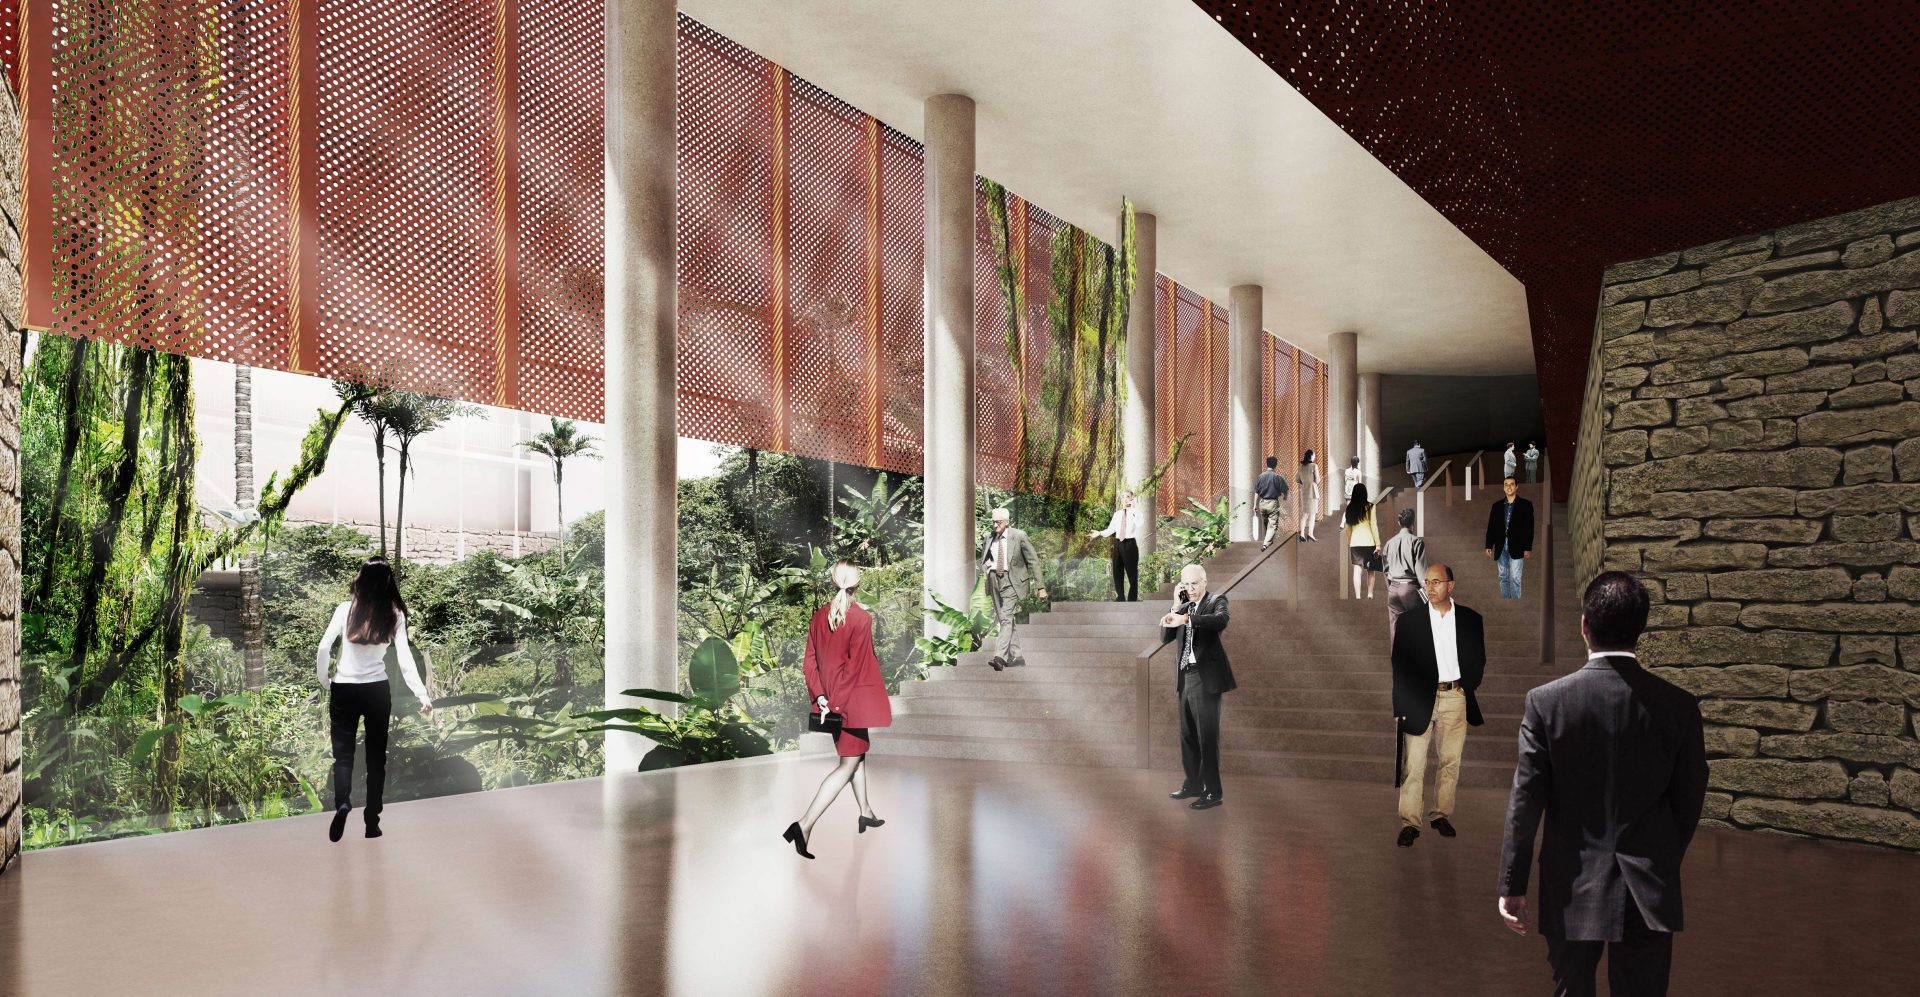 Costa Rica National Assembly Lemay Architecture asd